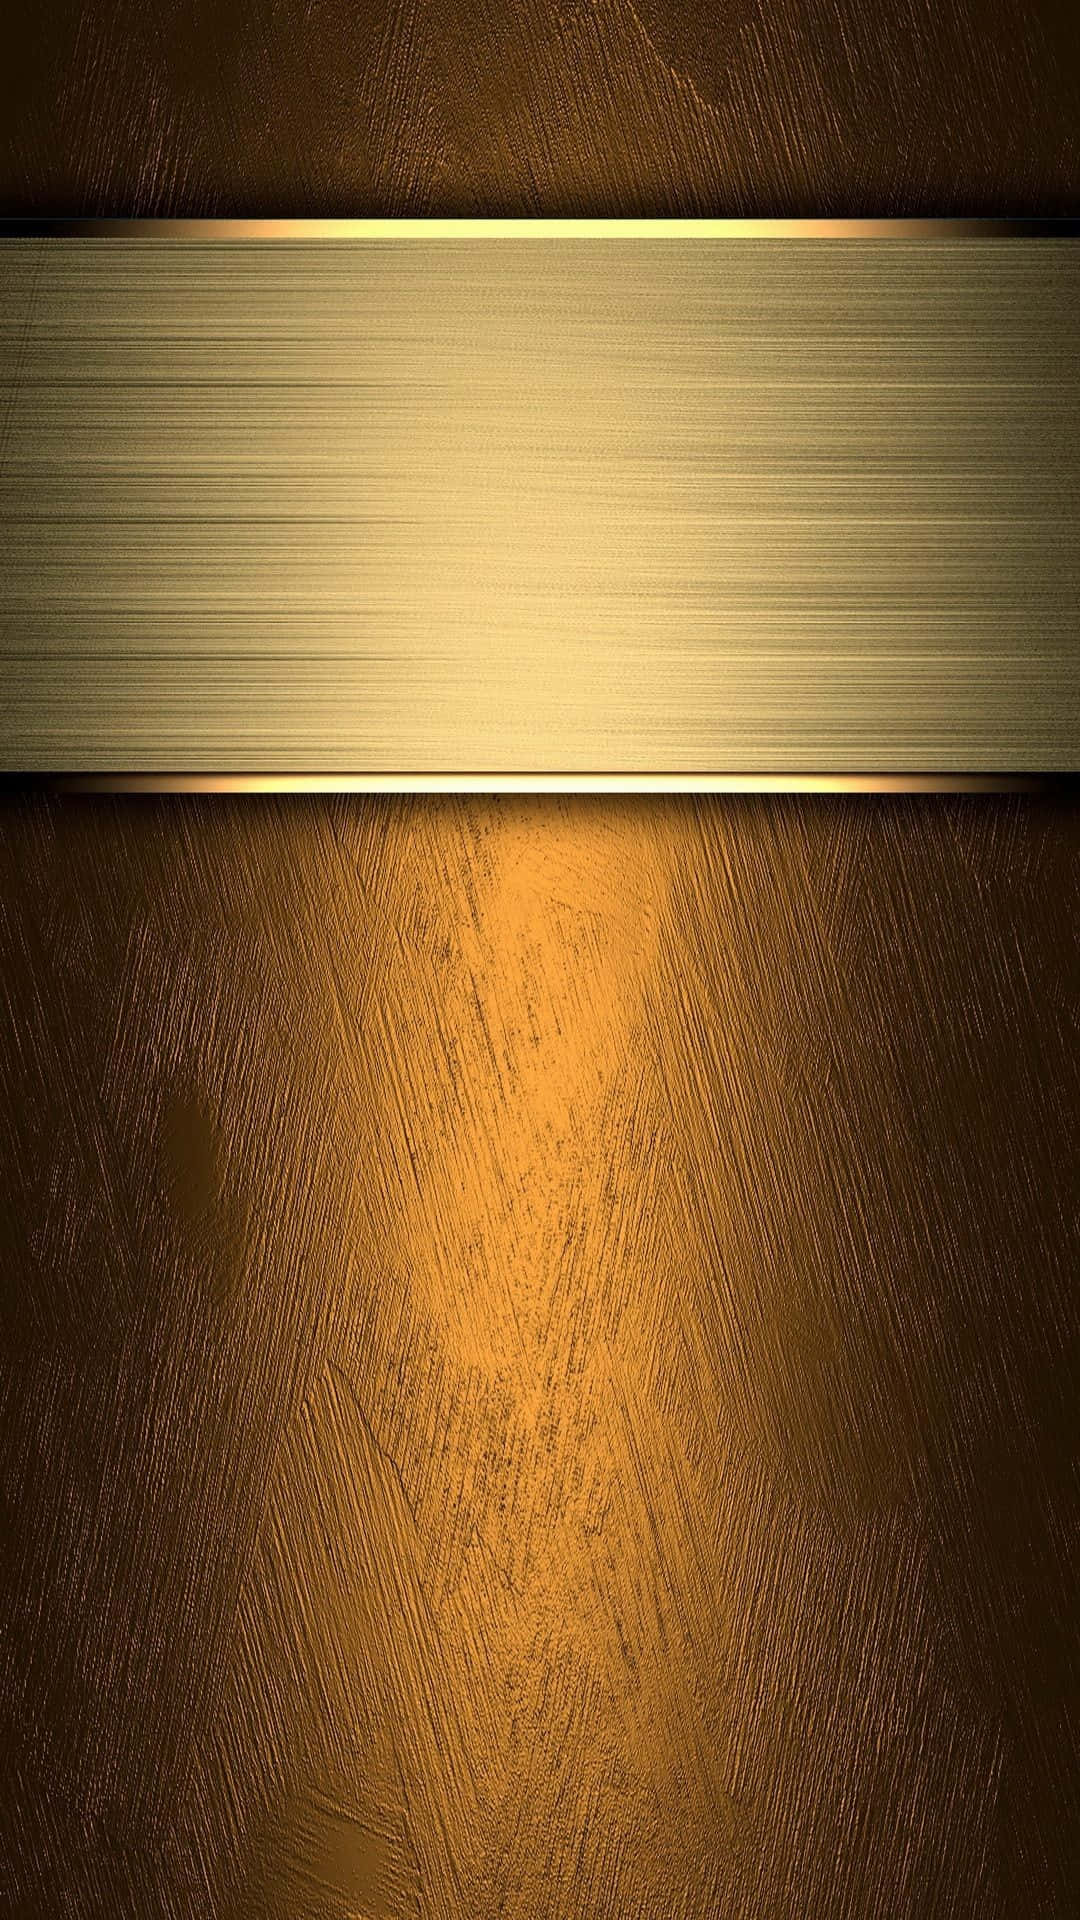 Upgrade Your Smartphone To The Stunning Gold Iphone Background